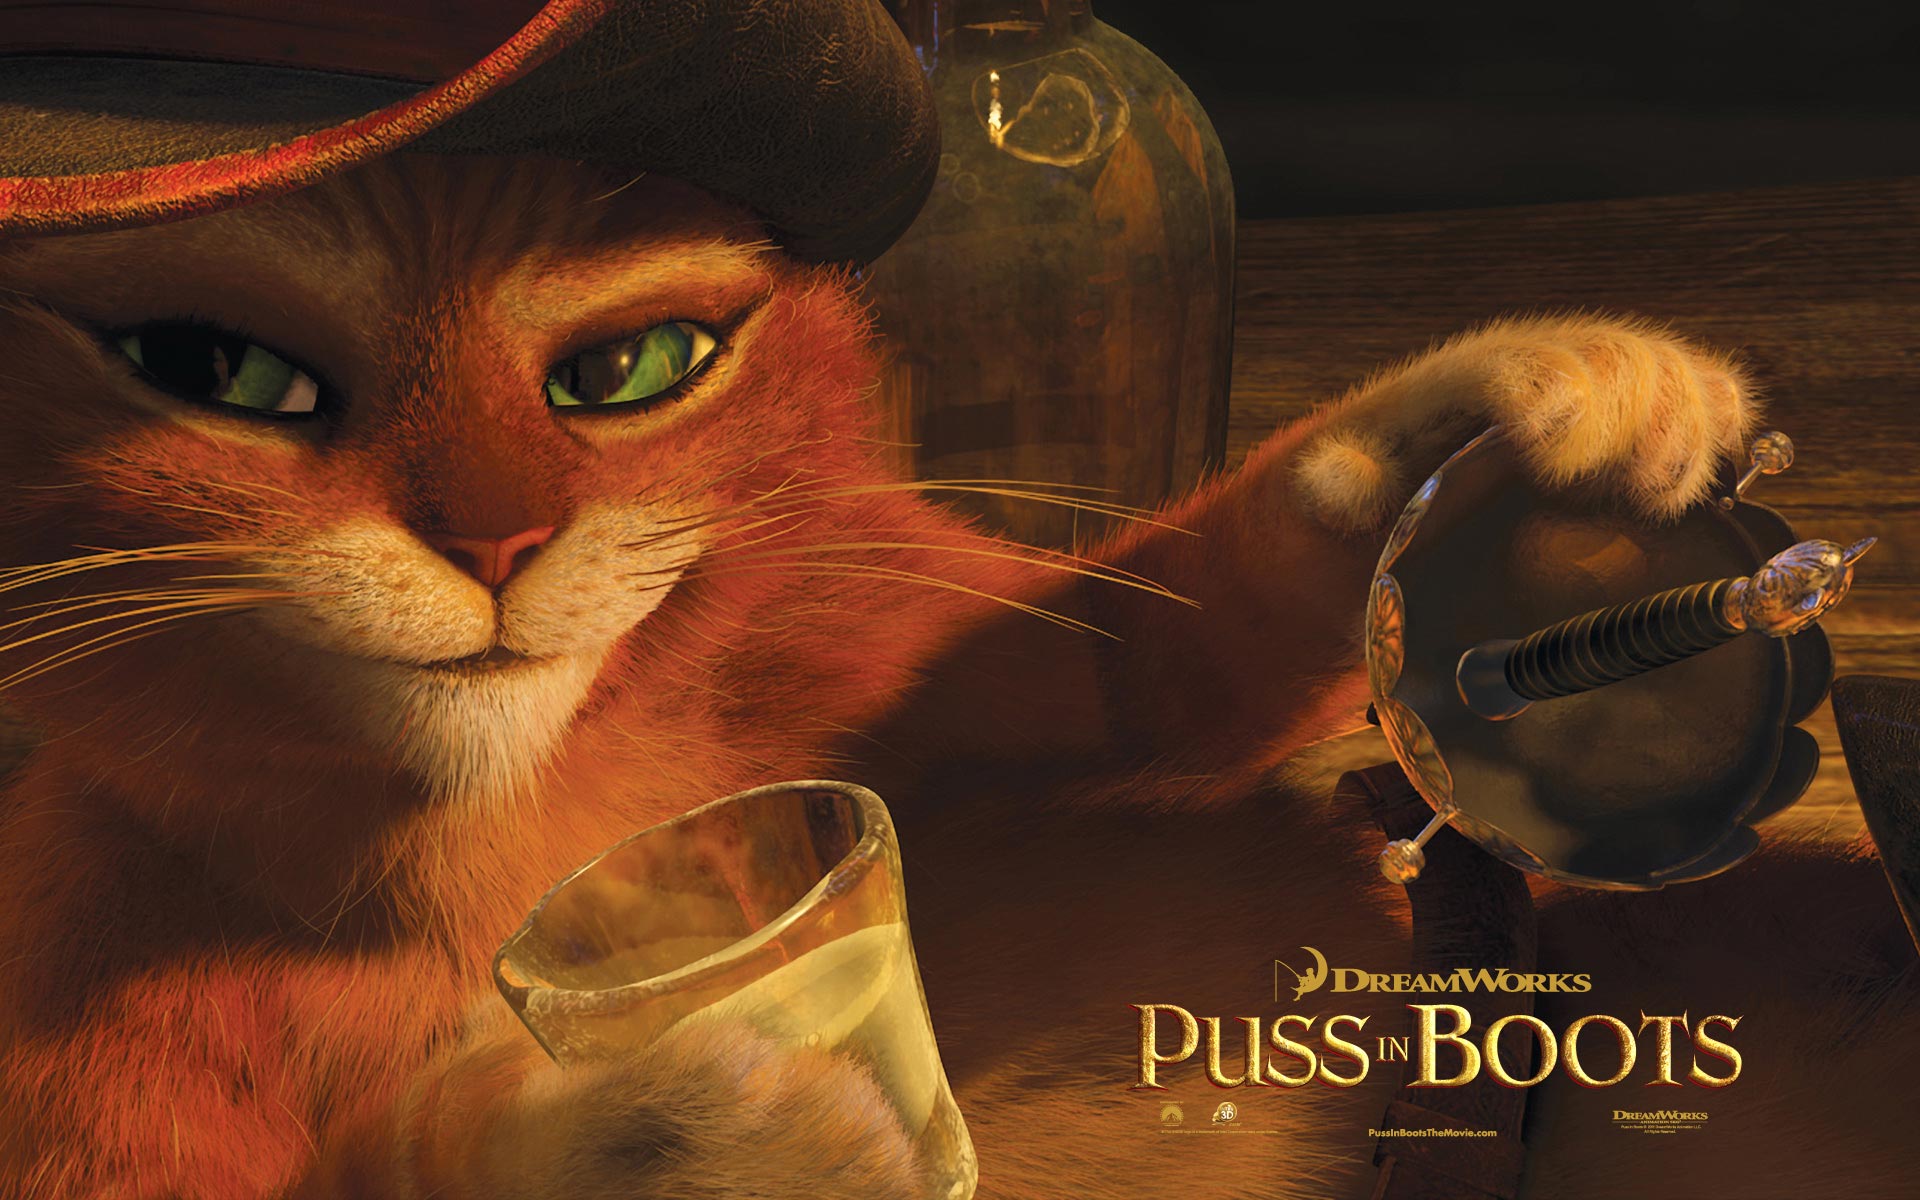 Puss In Boots Opening 3d 2d And Imax Theaters On October 28th